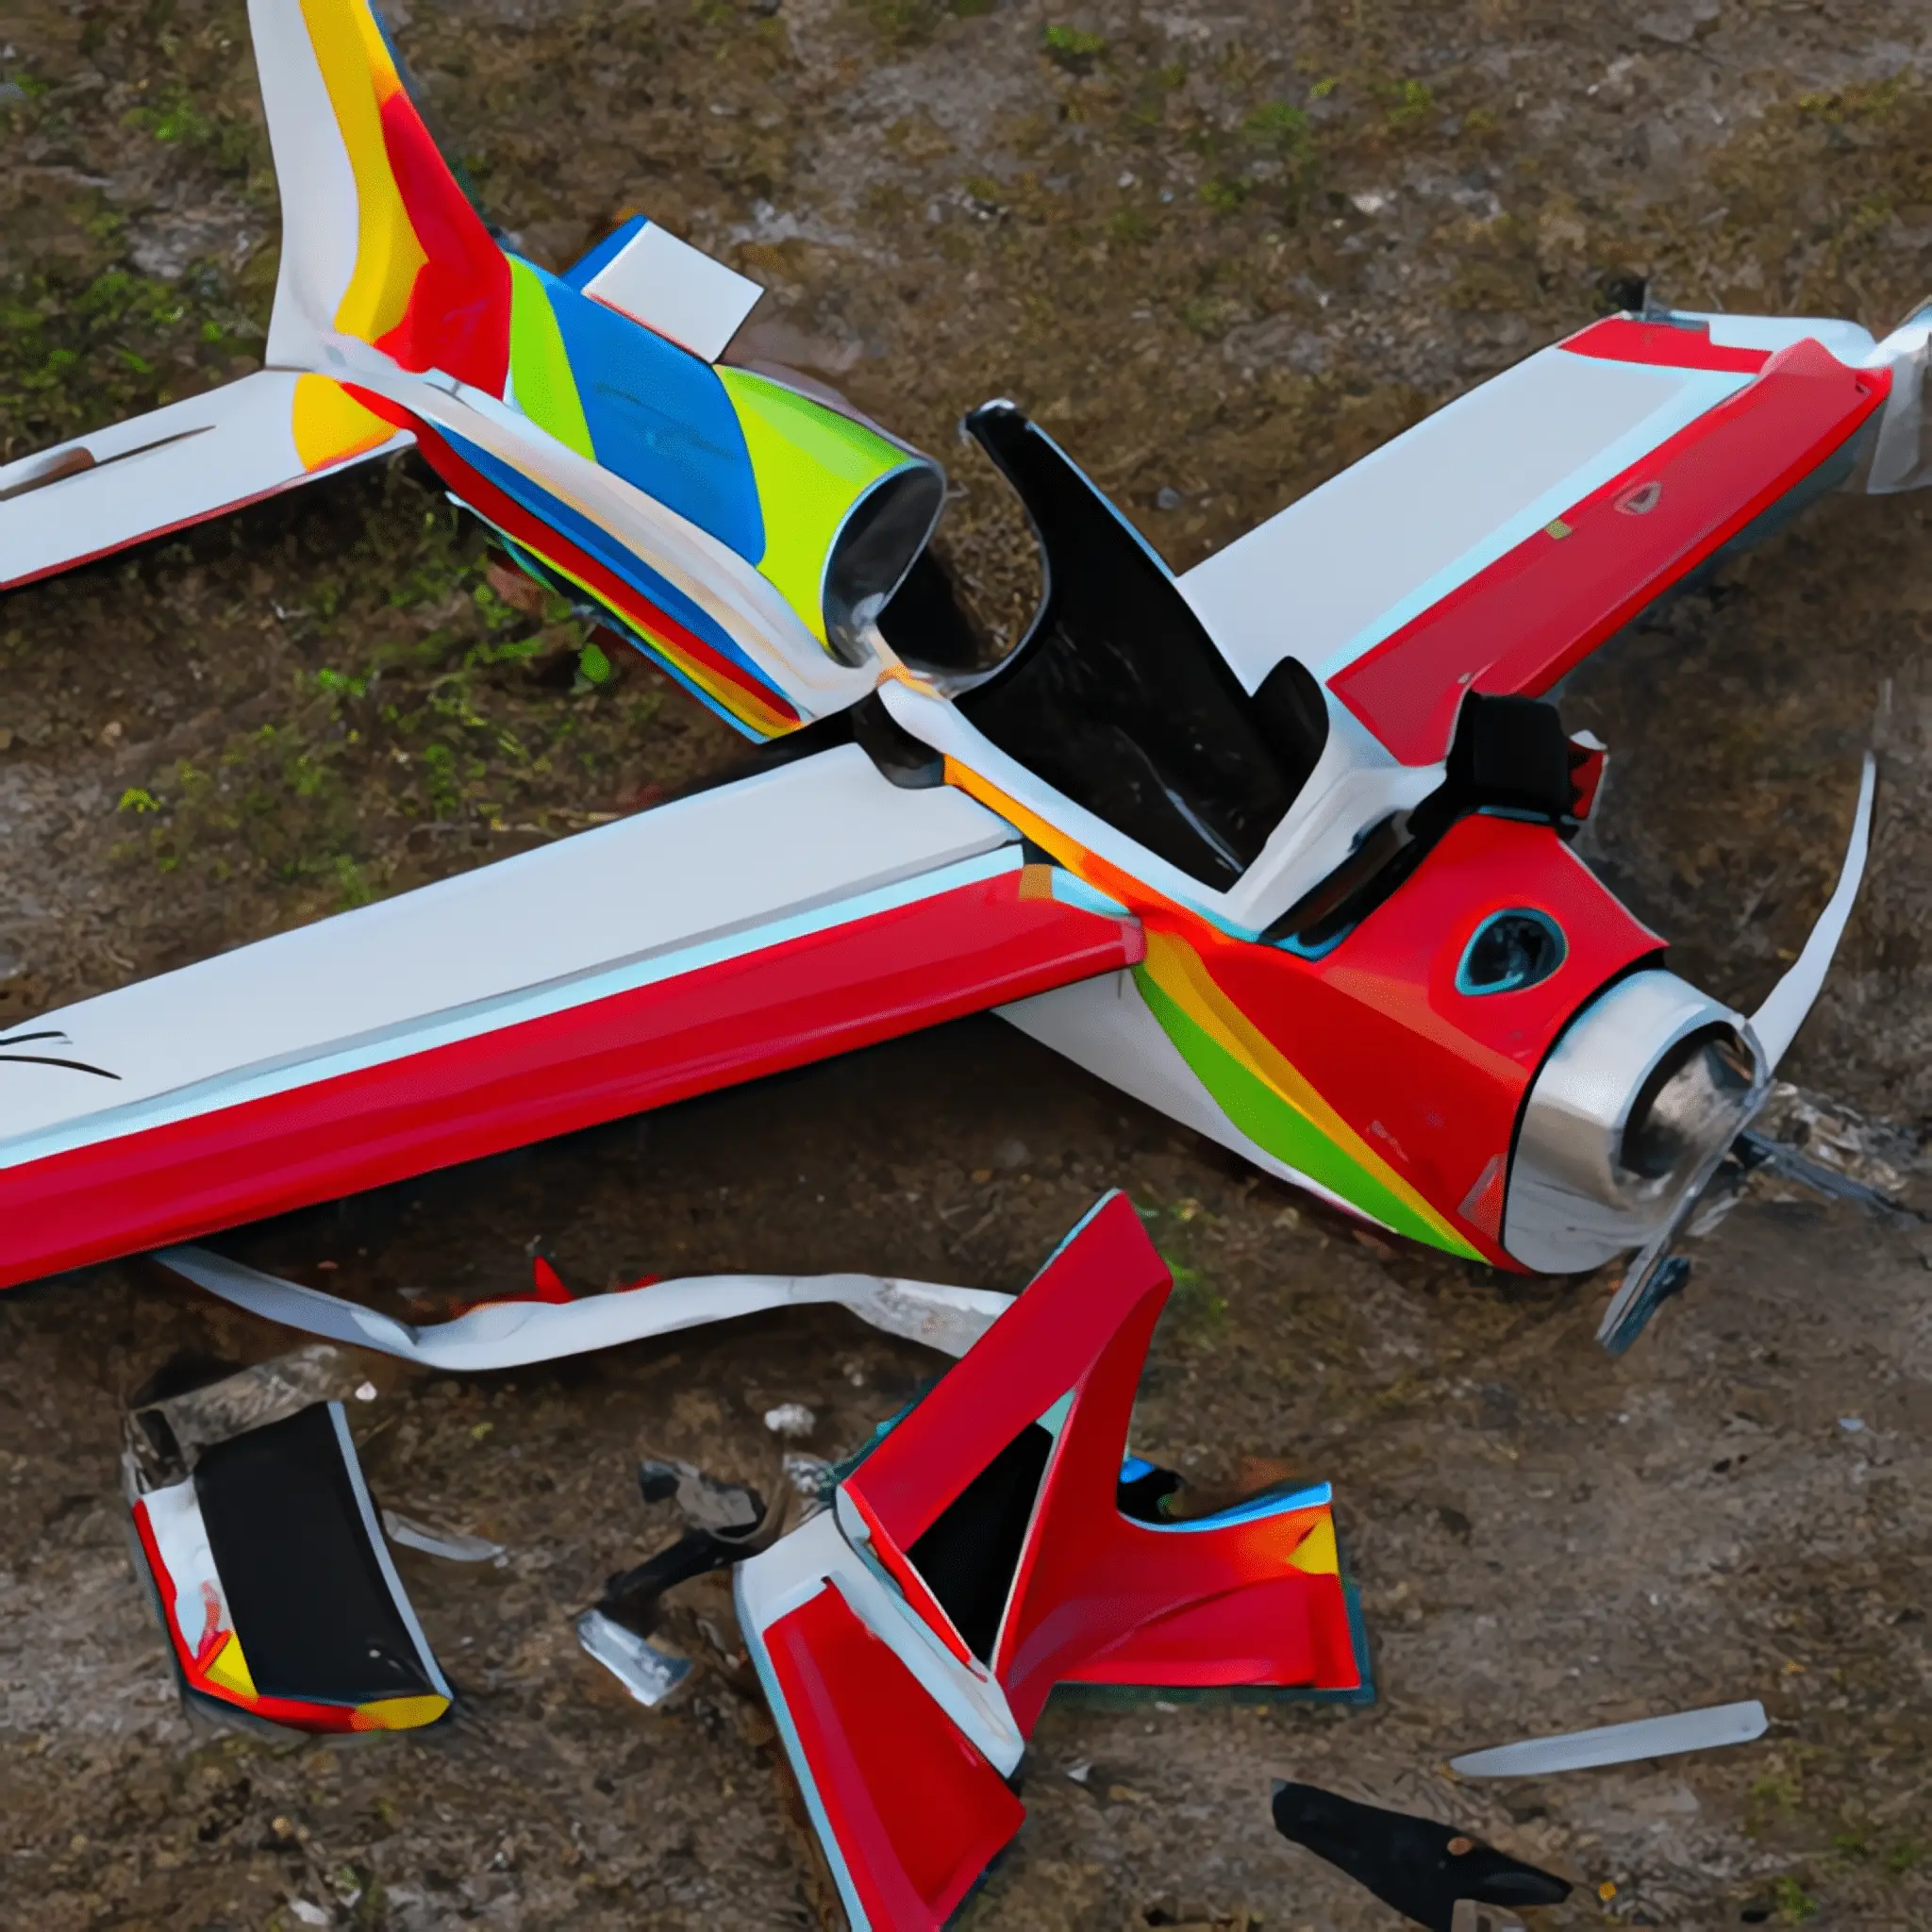 RTF RC planes with SAFE technology: No More Crashes?